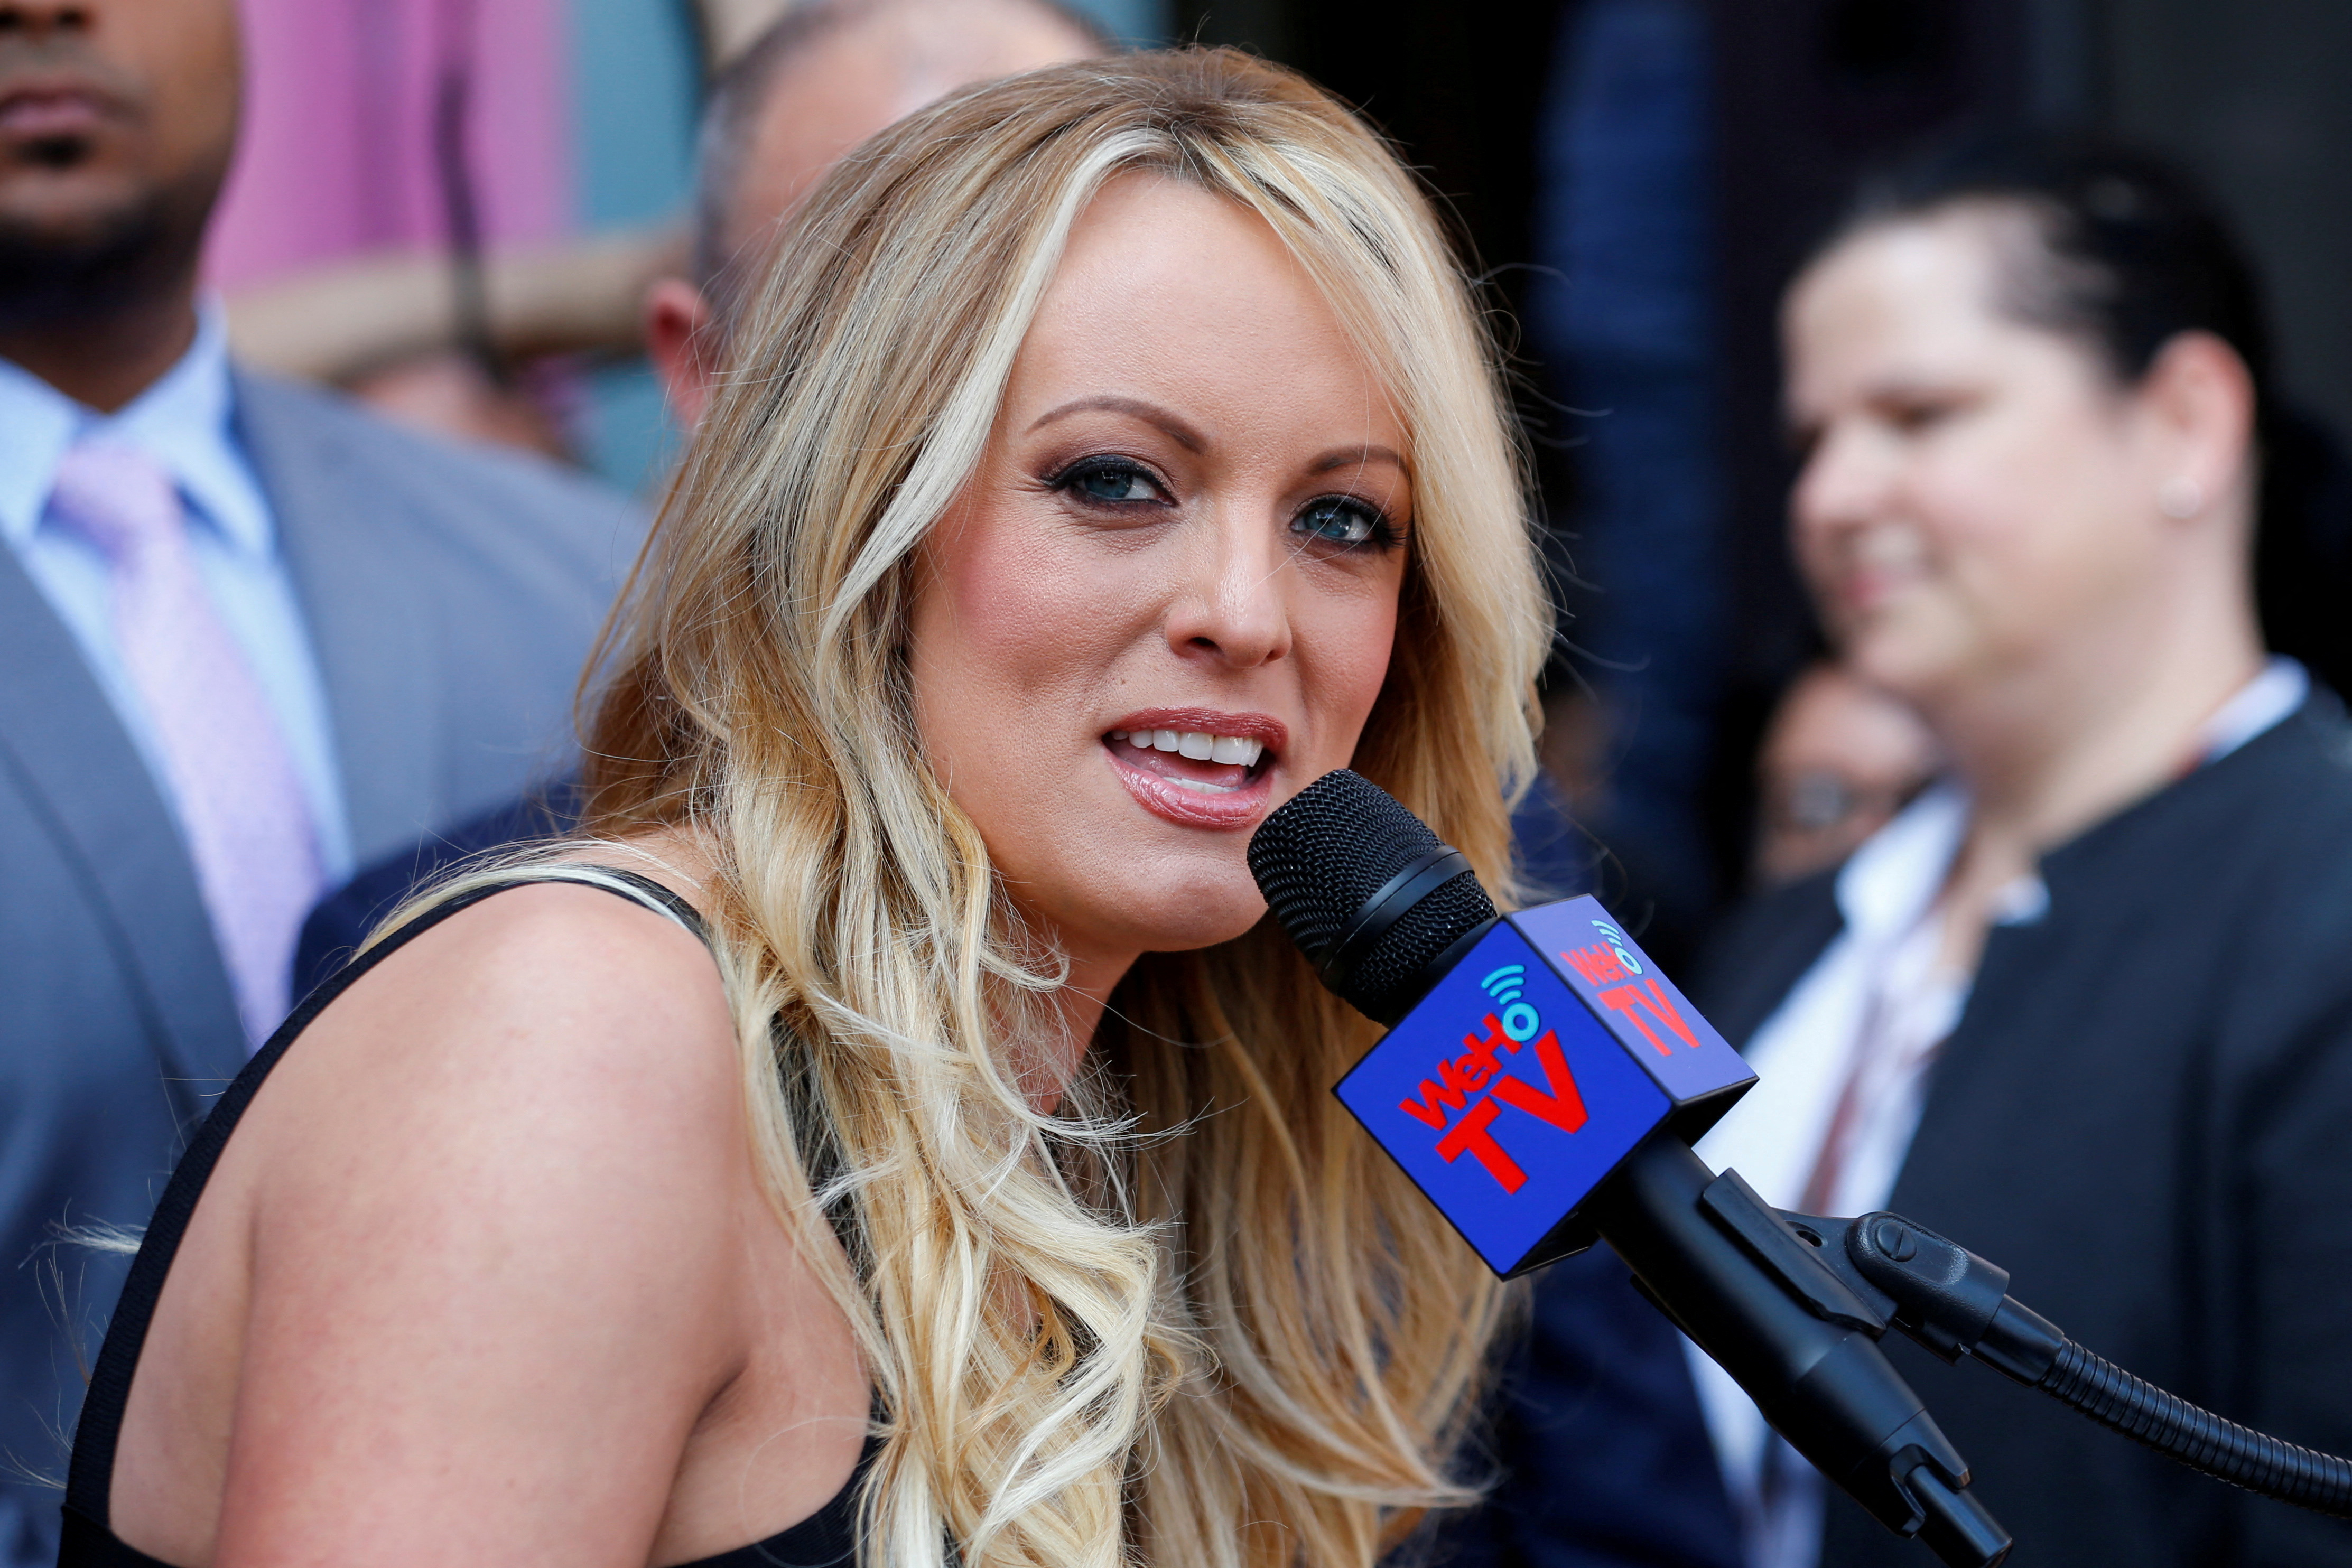 Who is Stormy Daniels and how is she involved in the Donald Trump indictment? Reuters image picture